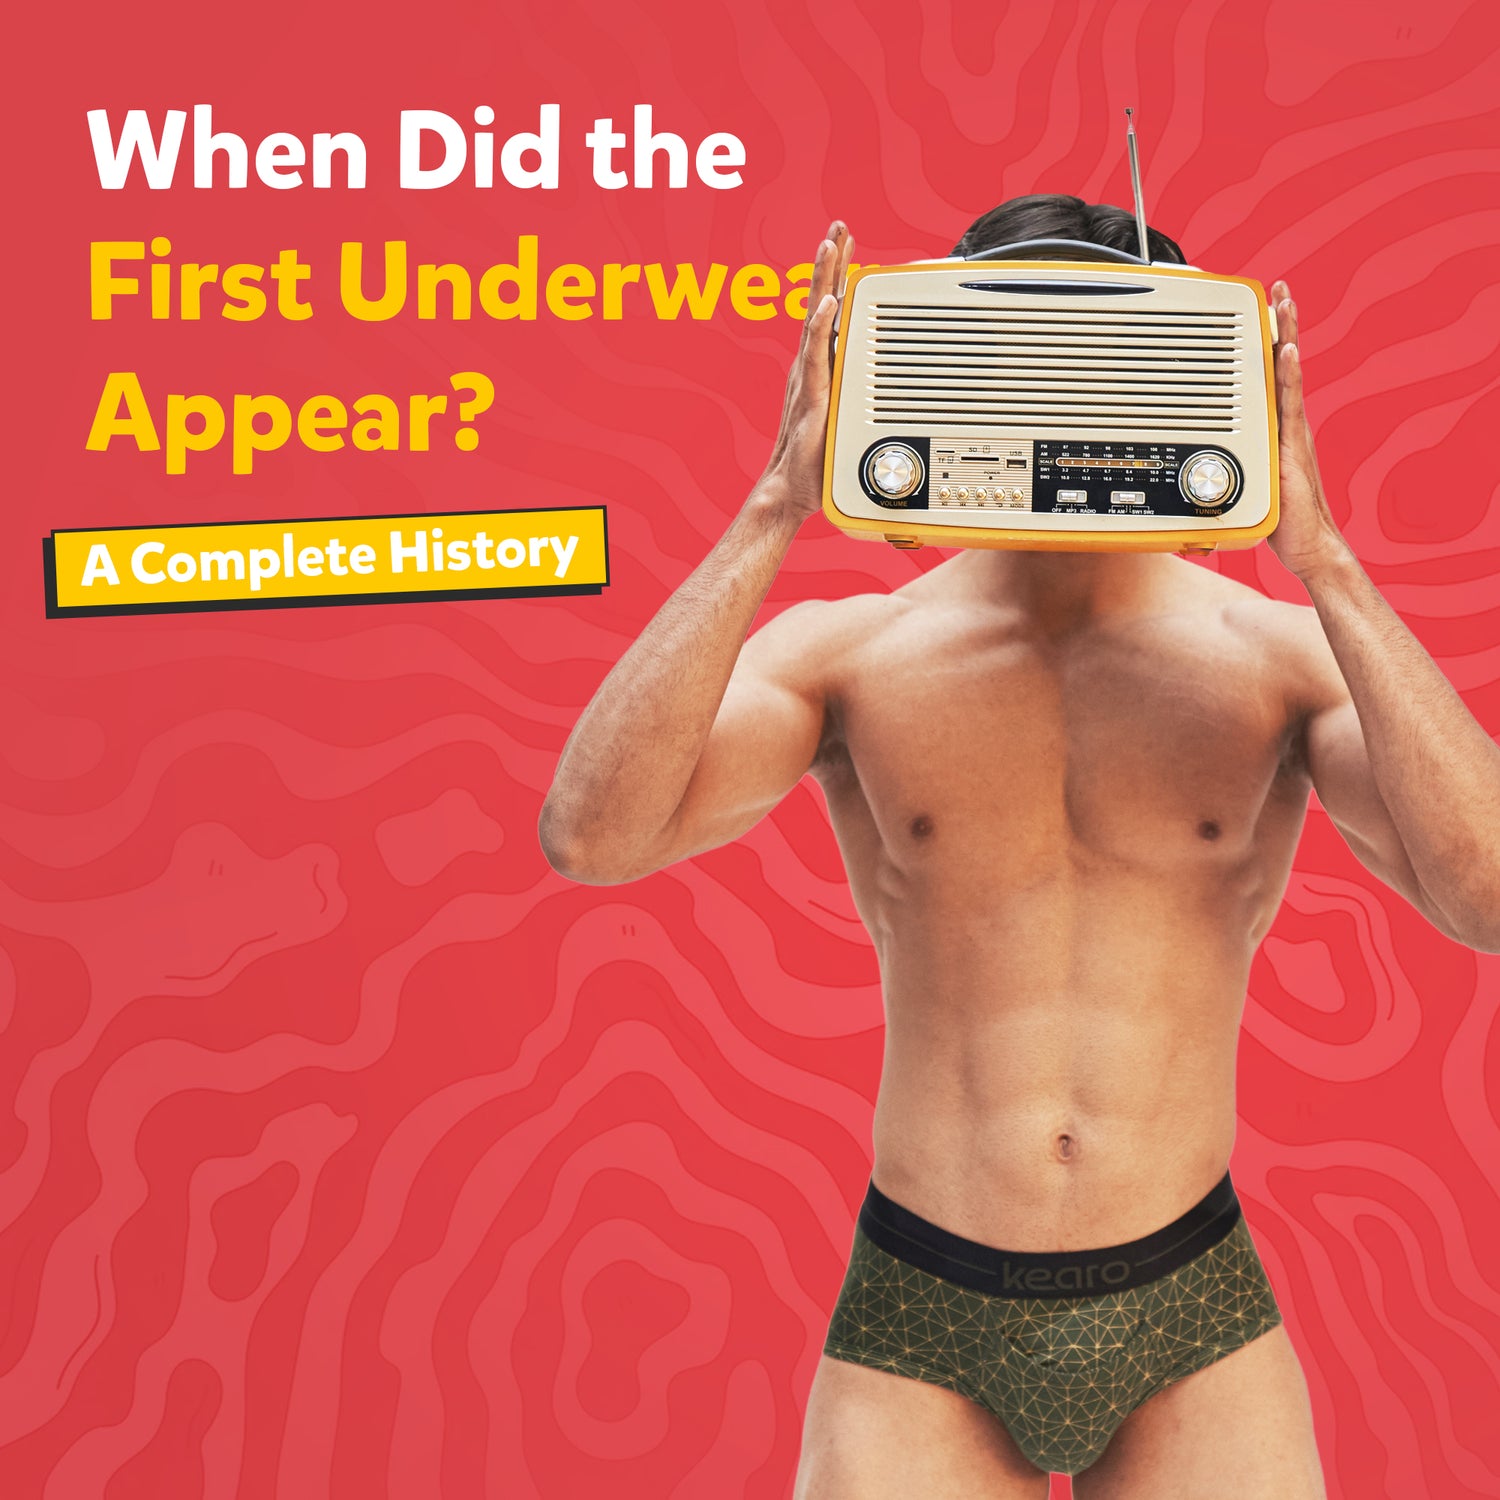 When Did the First Underwear Appear? A Complete History